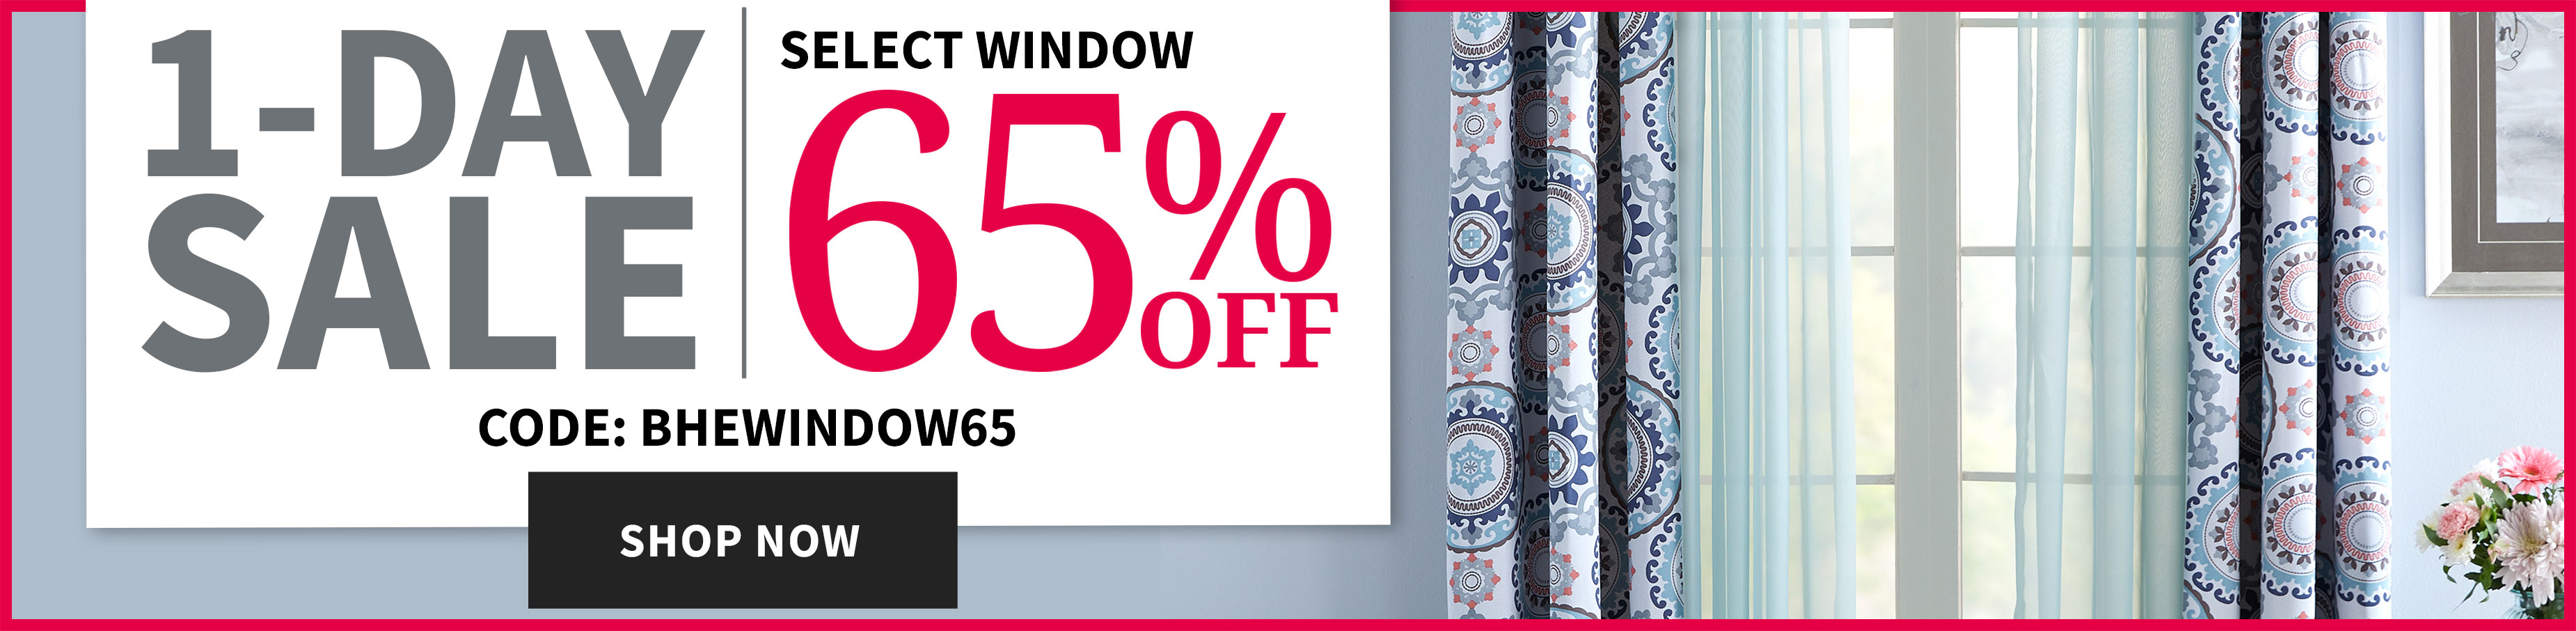 1-Day Sale up to 65% off WINDOW.